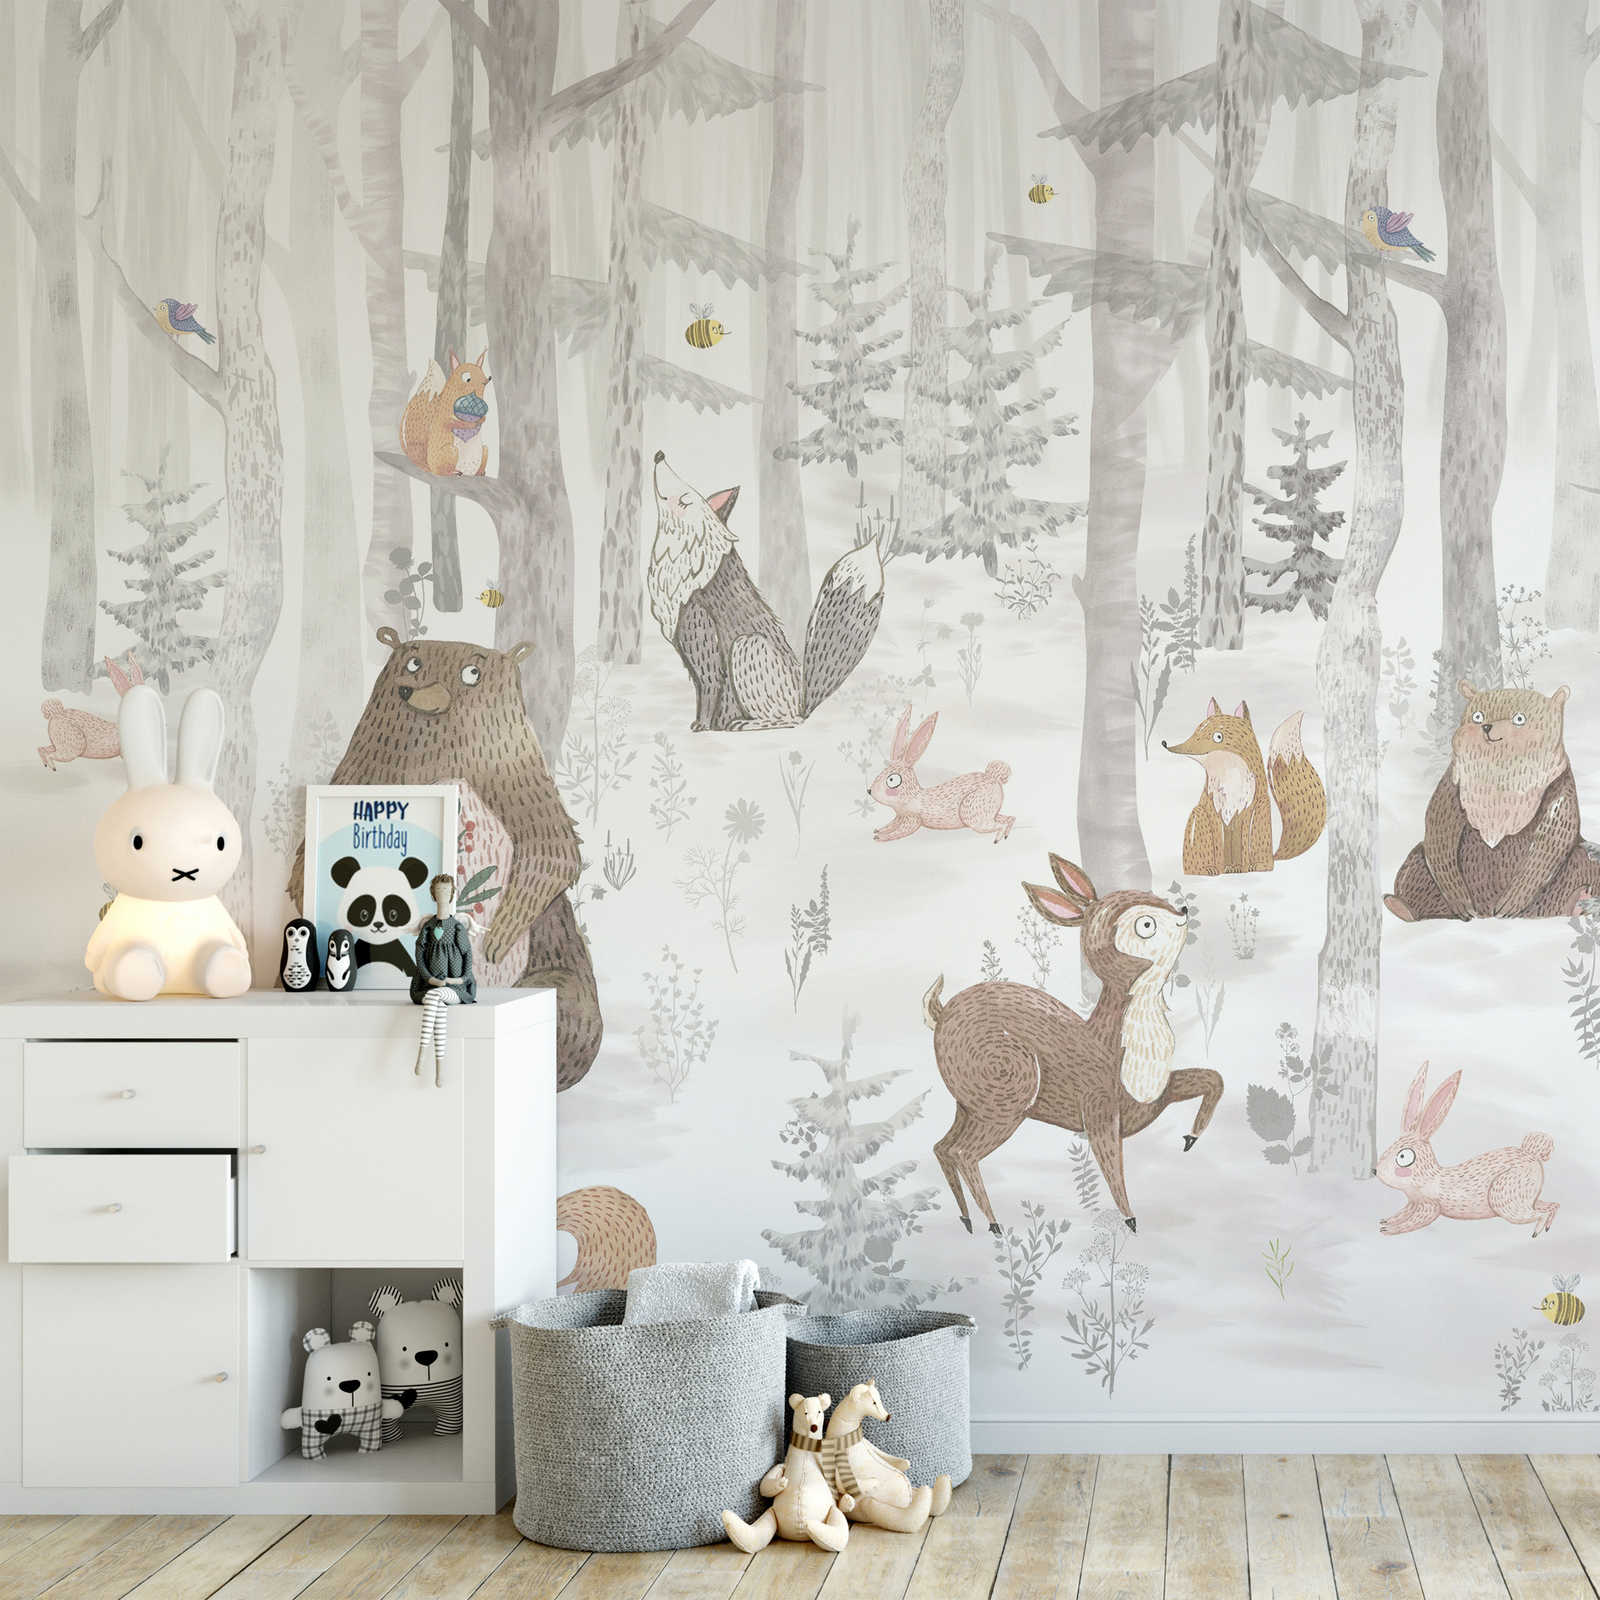 Photo wallpaper Enchanted Forest with Animals - Textured non-woven
